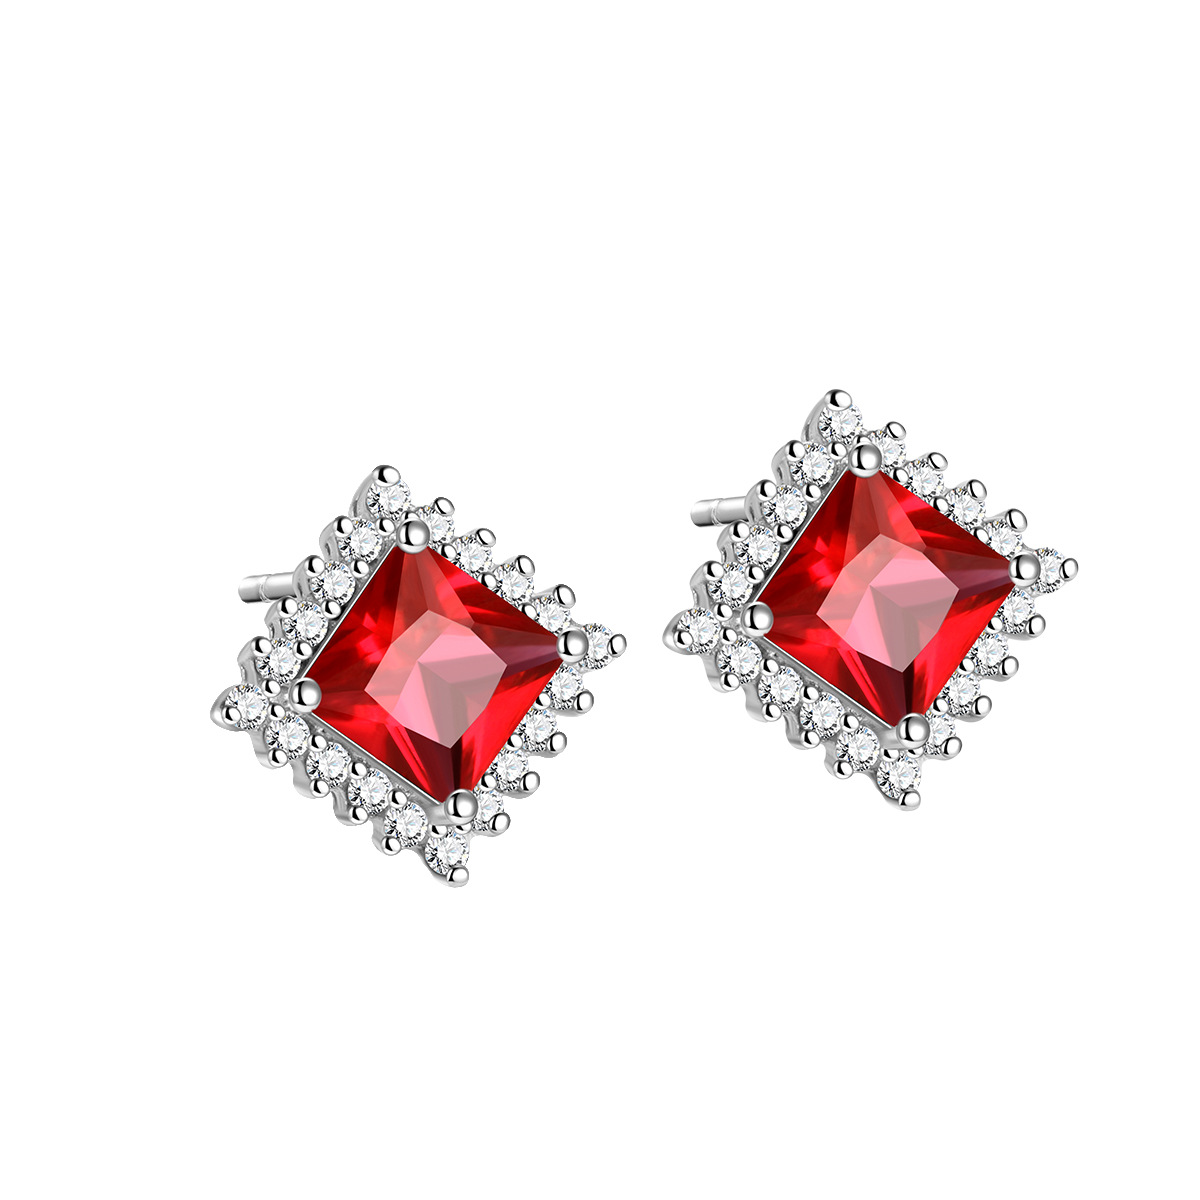 3:White gold red stone